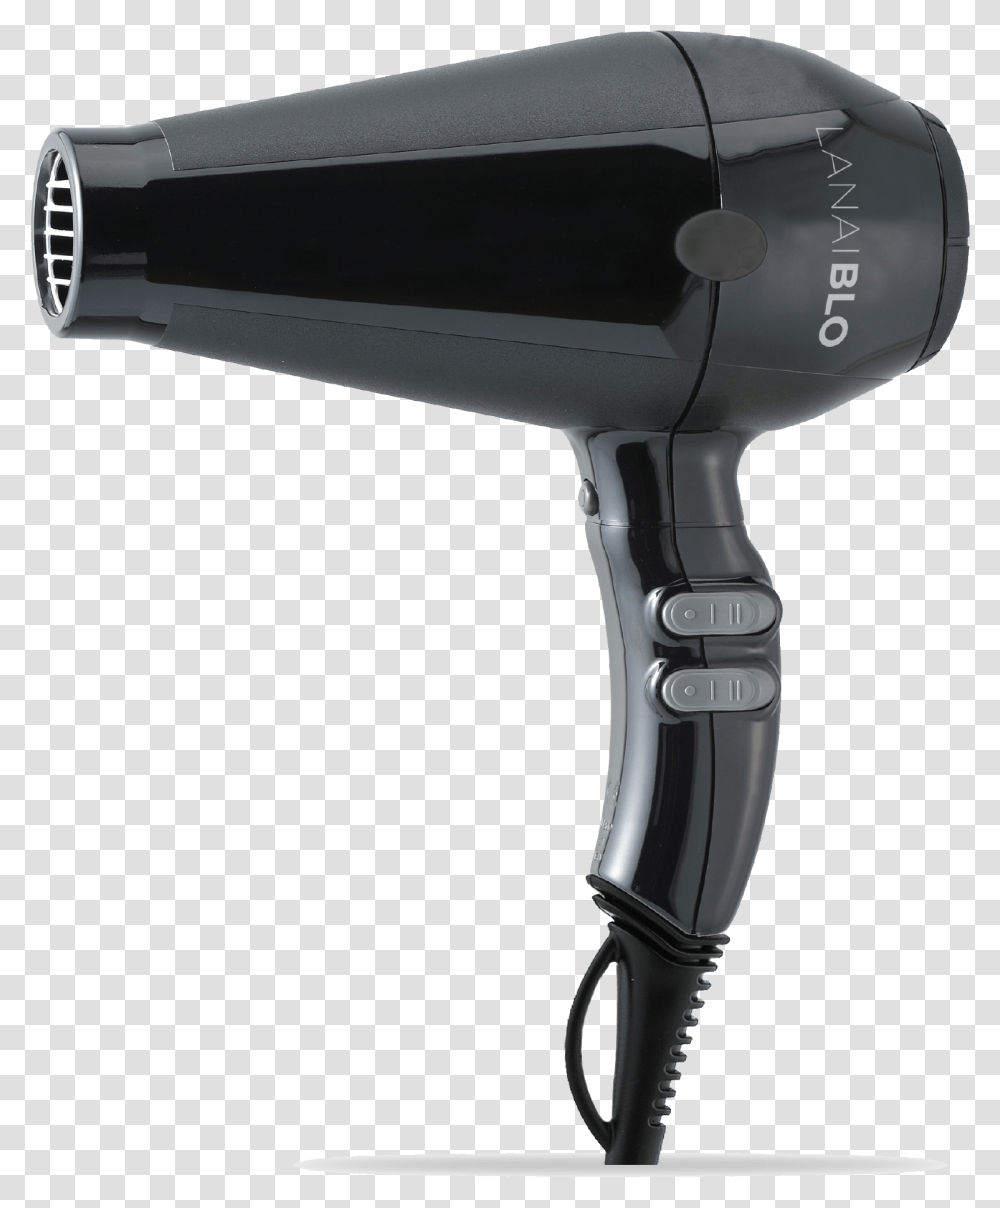 Hairdryer High Quality Image Hairdryer, Blow Dryer, Appliance Transparent Png